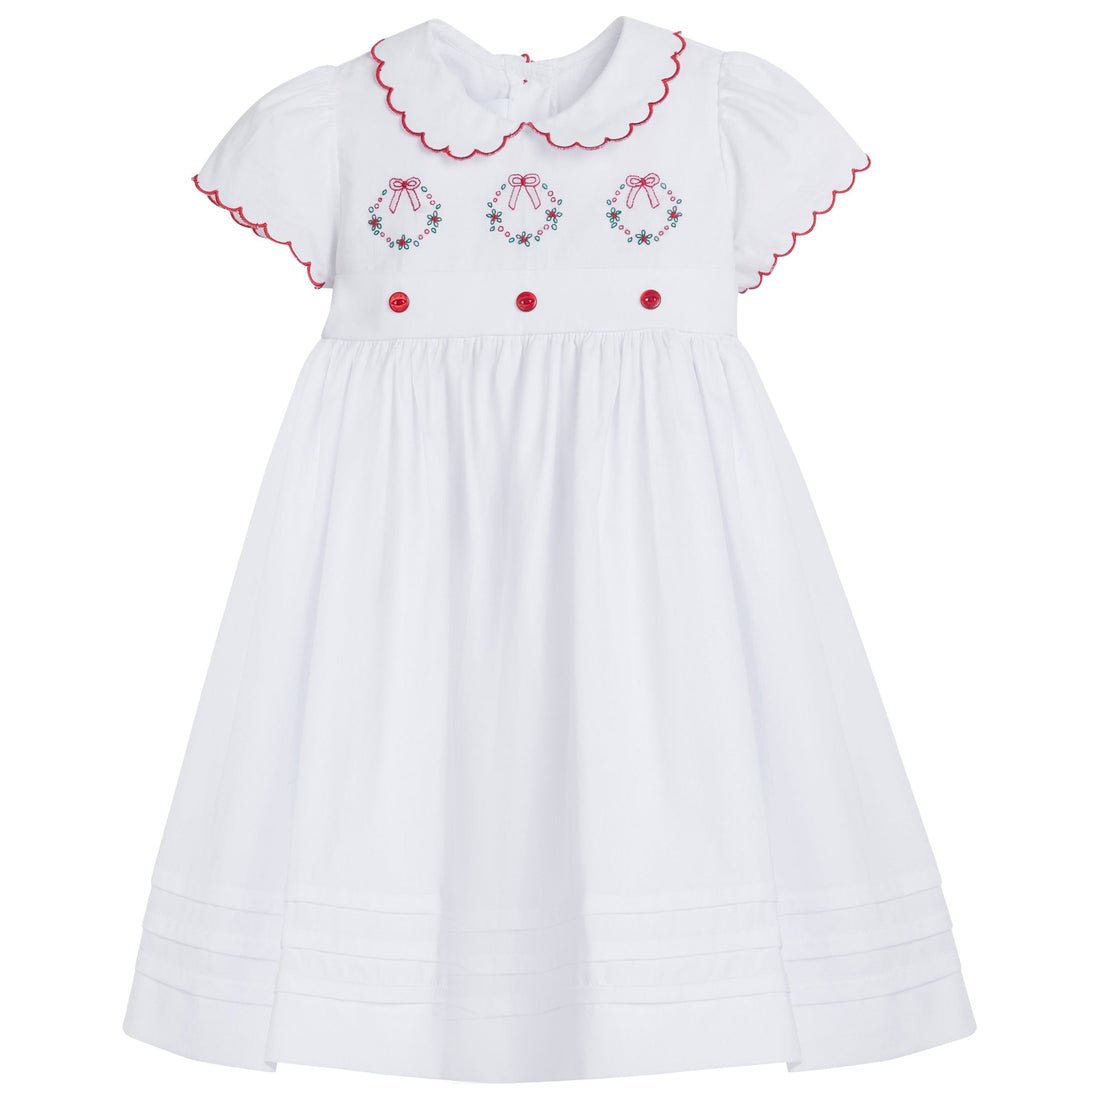 little english classic childrens clothing girls white dress with peter pan collar and red trim with wreath and red button detail